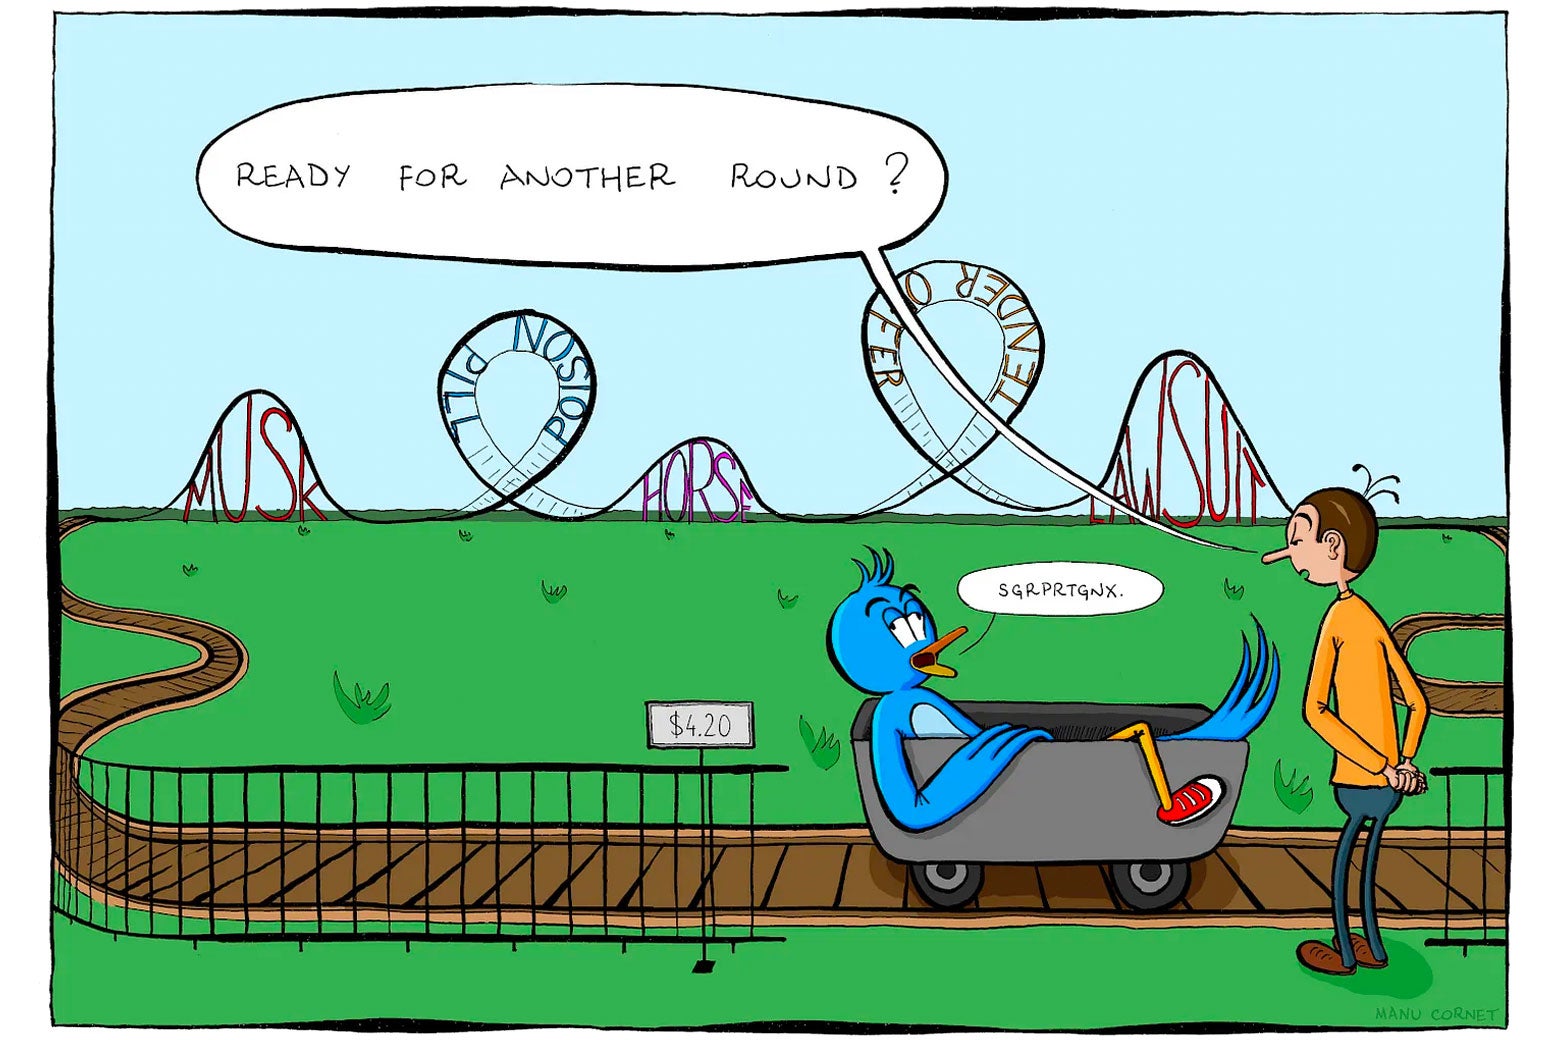 A giddy Twitter bird who just went on a roller coaster.